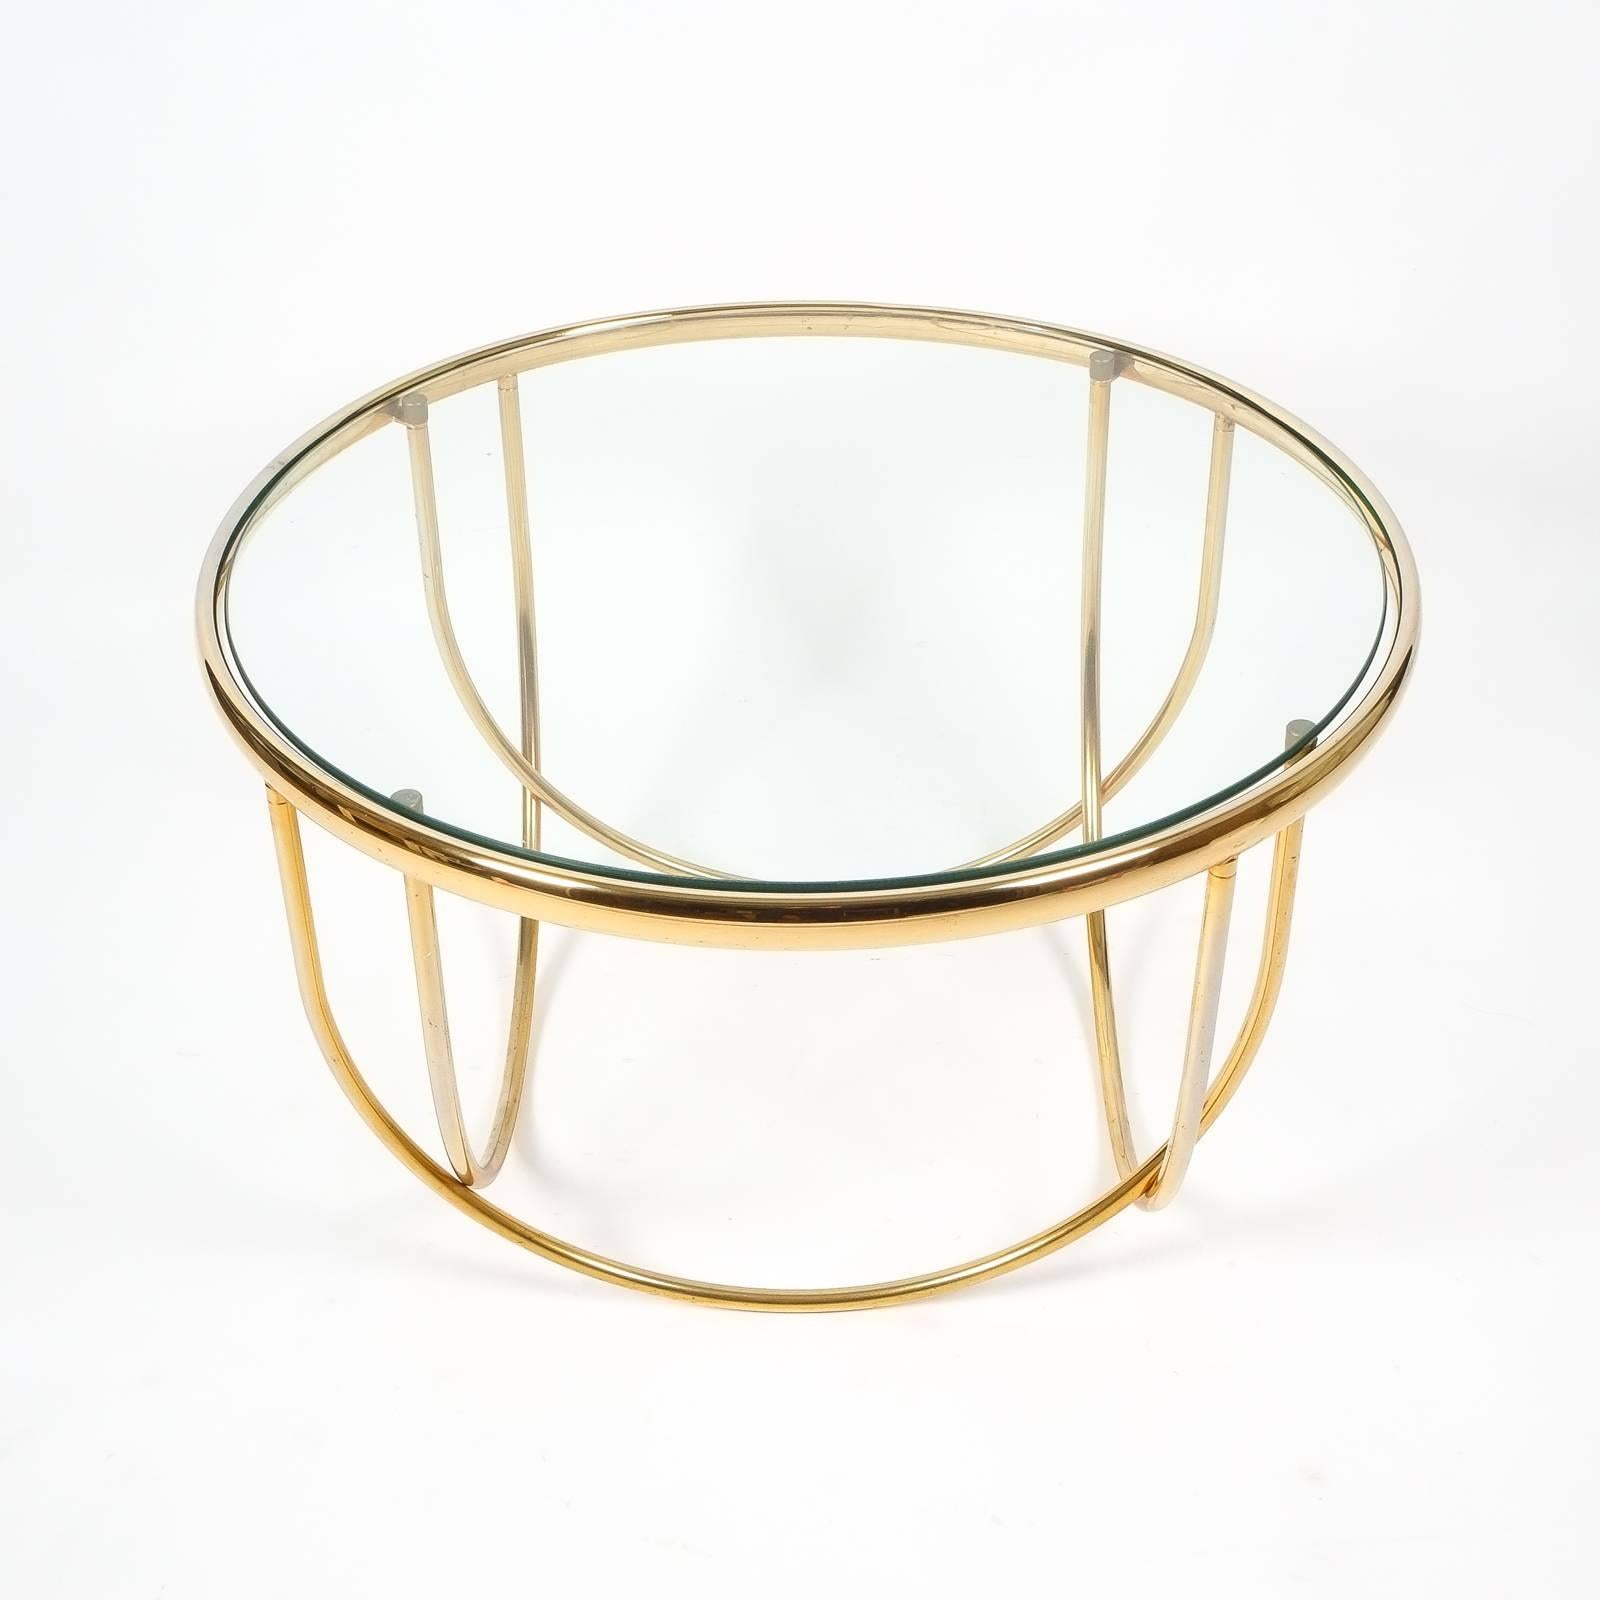 Nice pair of french 31 inch (diameter) brass tables with entwined bended tubes and floating glass top. The brass plating shows some rub-off here and there, the original glass table tops are present but should be replaced due to scratches (costs are